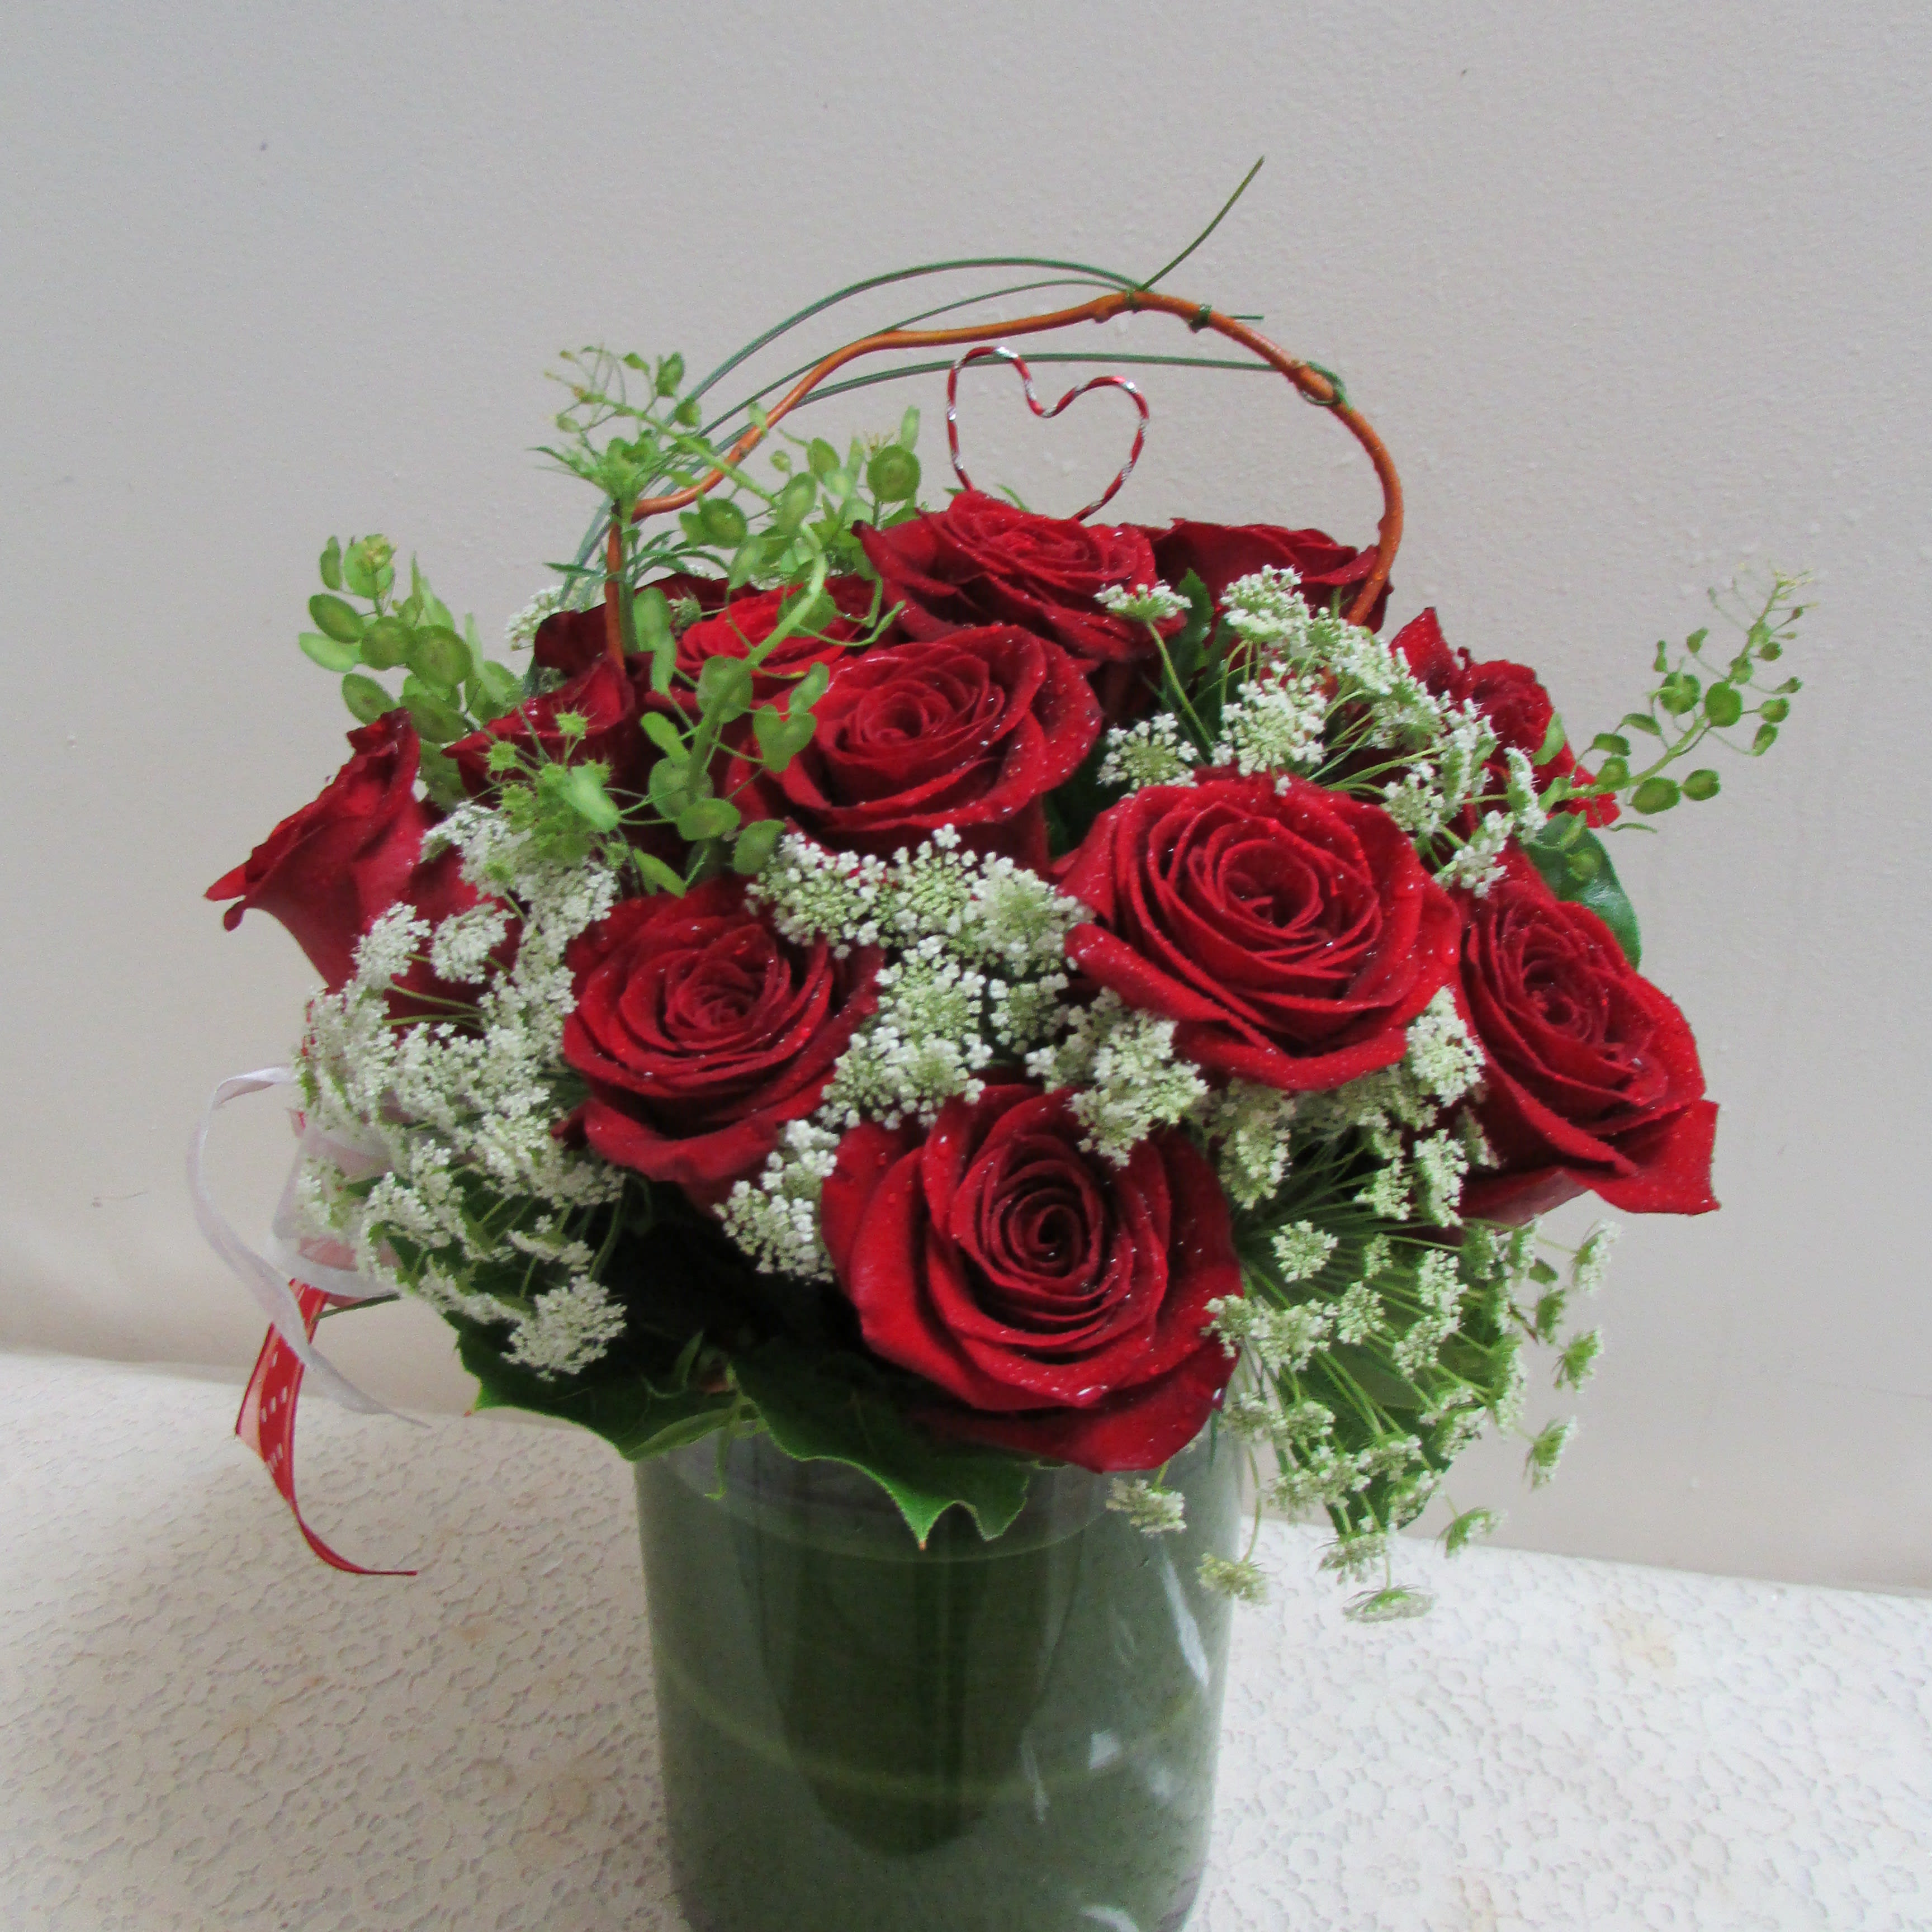 Sweet Rosy Red - Fifteen short roses arranged with greens in a short clear vase.